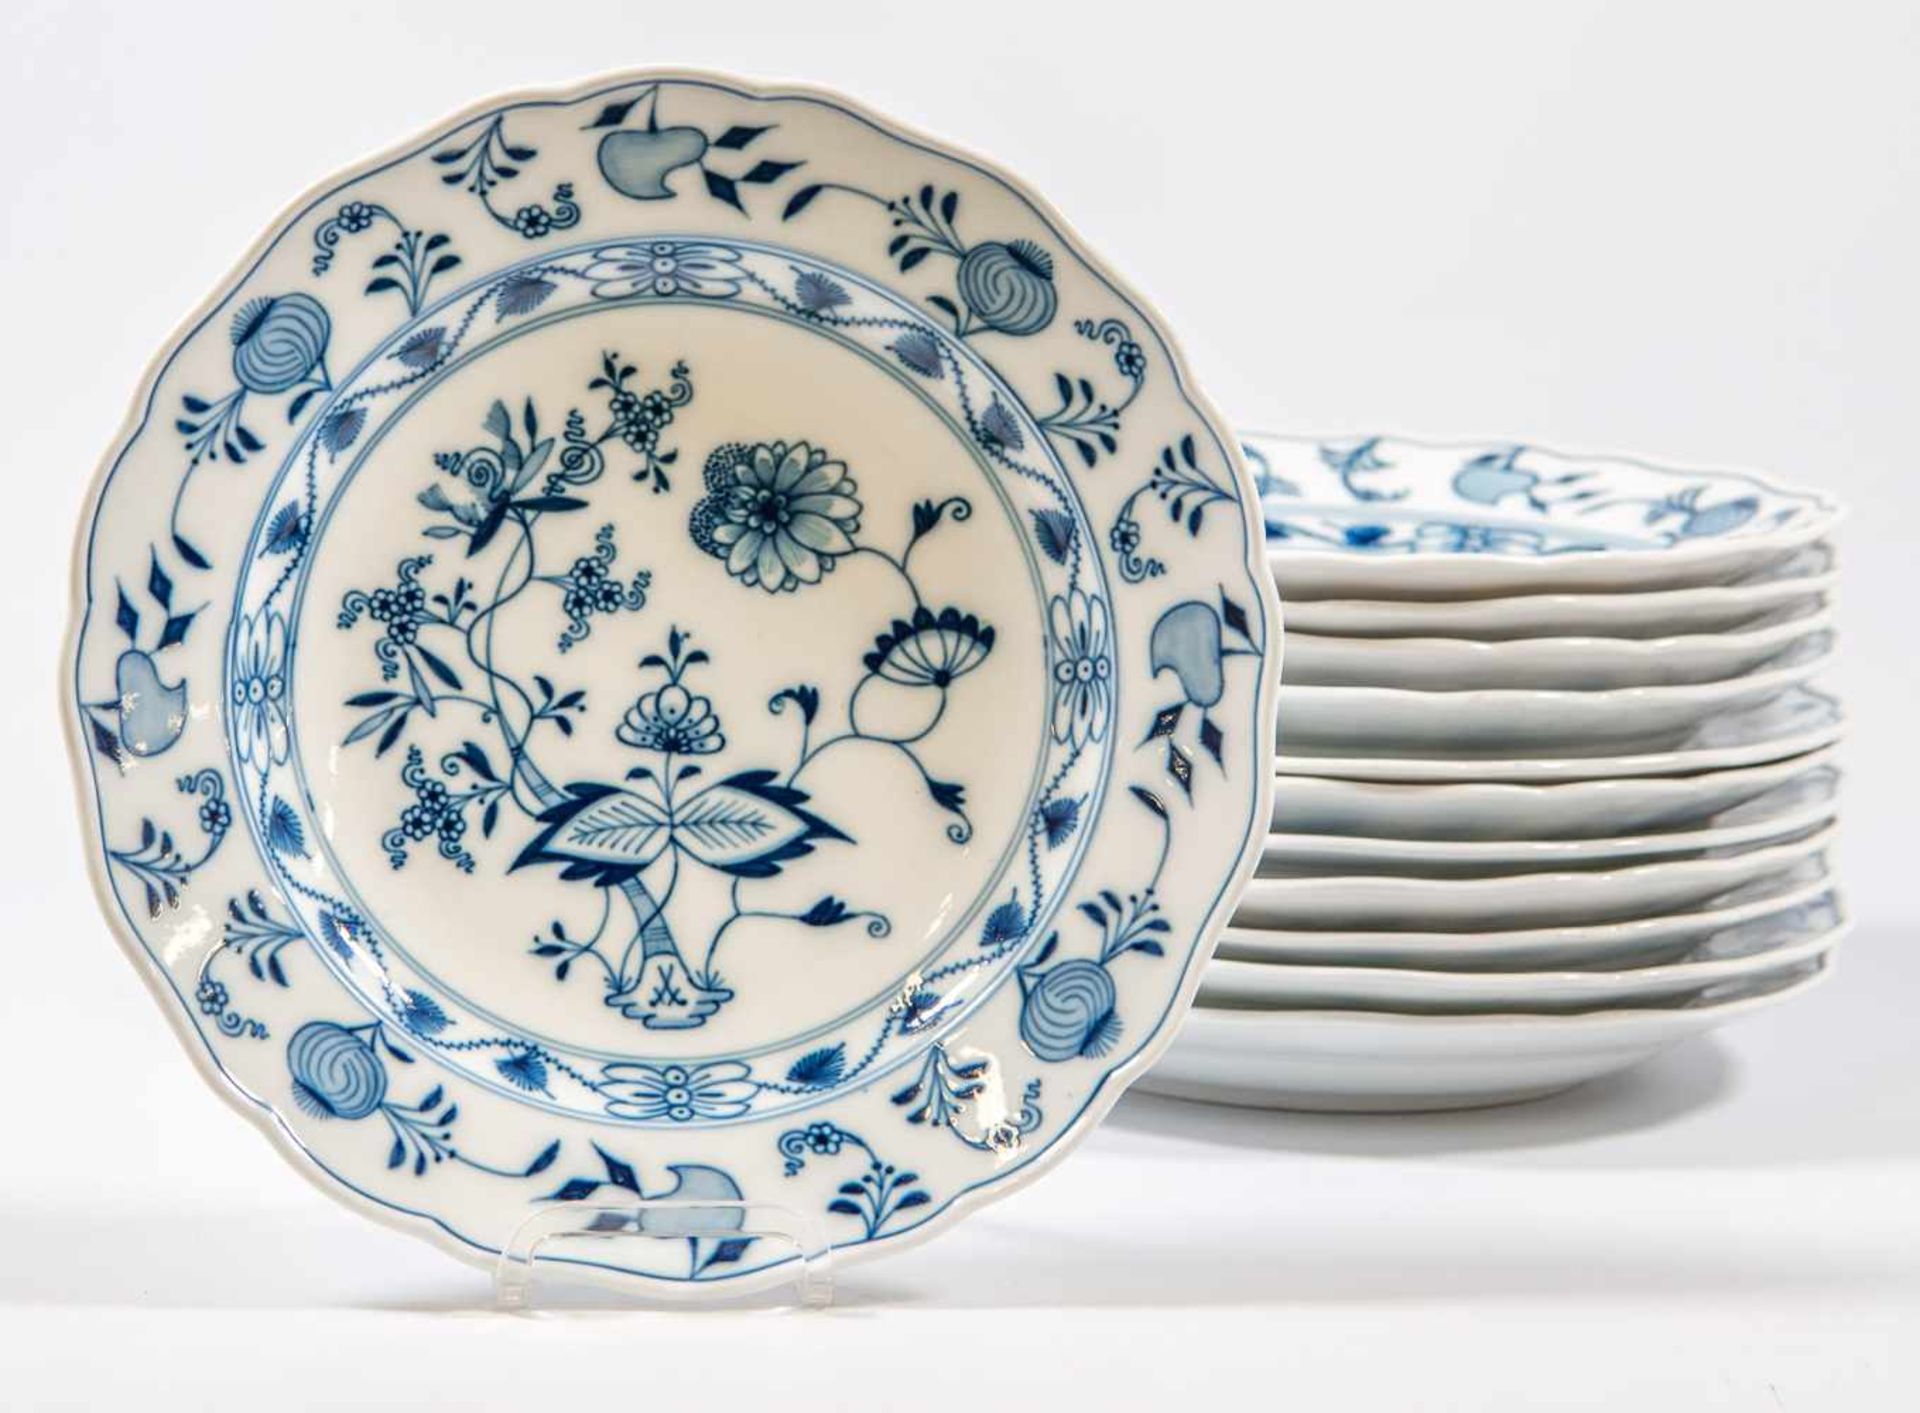 Collection of 12 Meissen porselein plates, marked with crossed swords, Meissen zwiebelmuster - Image 2 of 4